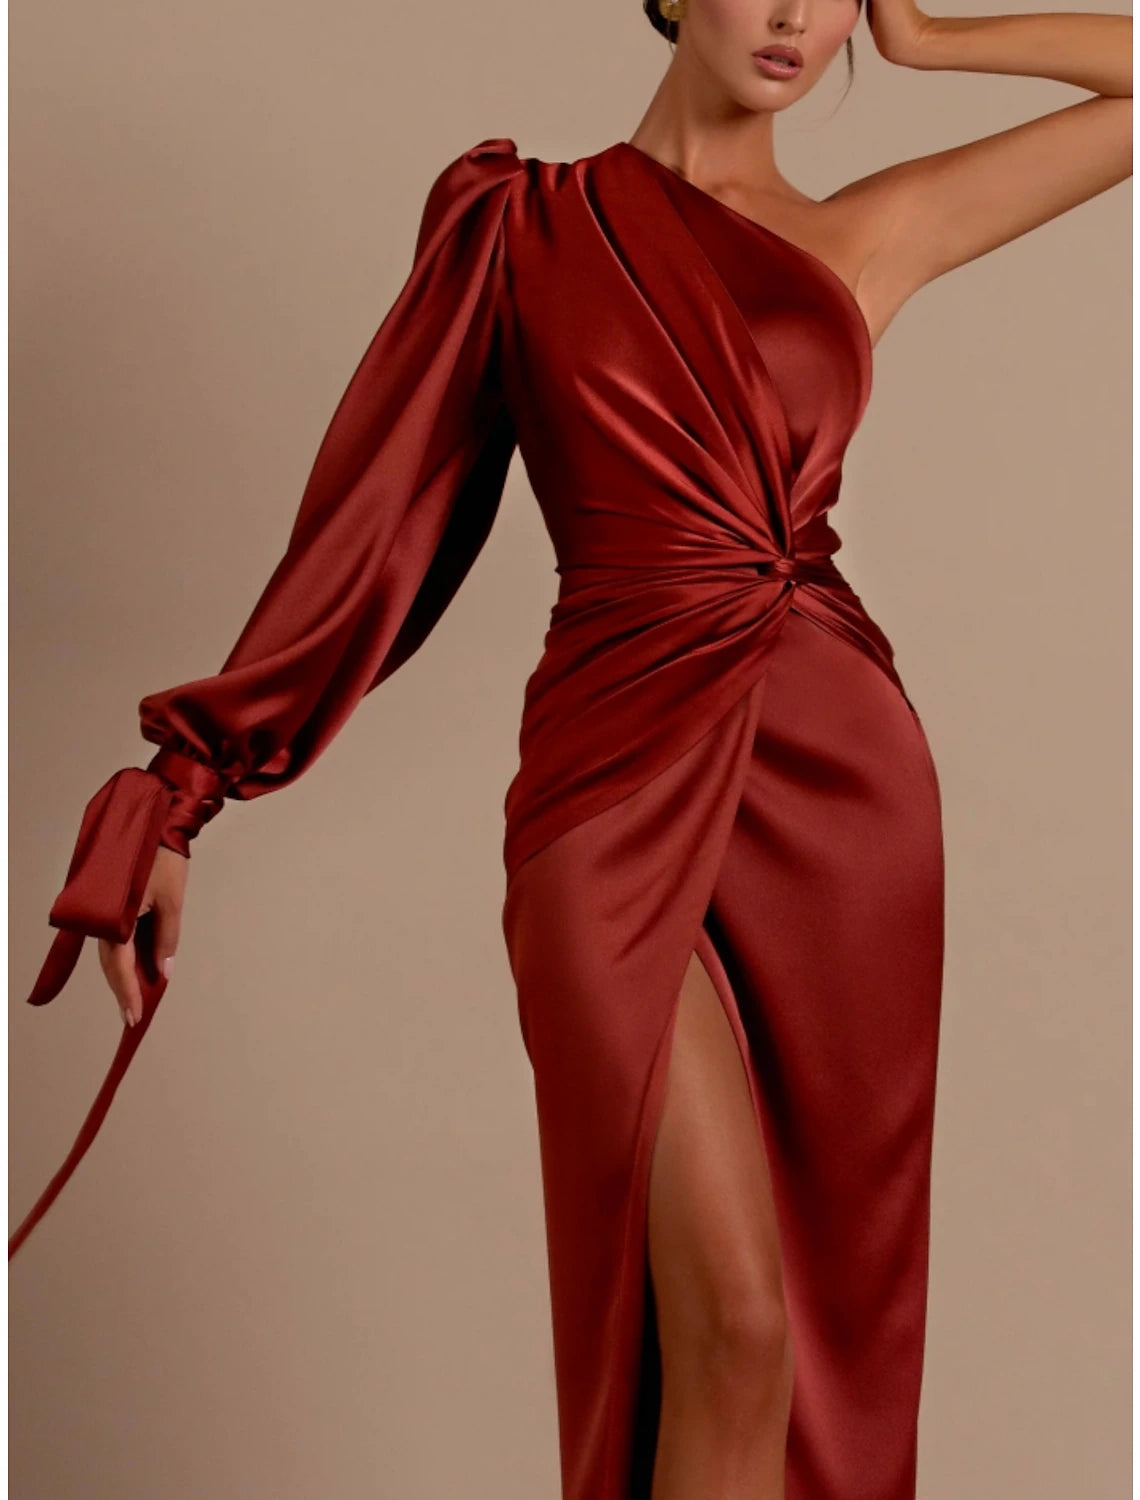 A-Line Evening Gown Elegant Dress Formal Sweep / Brush Christmas Red Green Dress Train Long Sleeve One Shoulder Satin with Feather Ruched Strappy